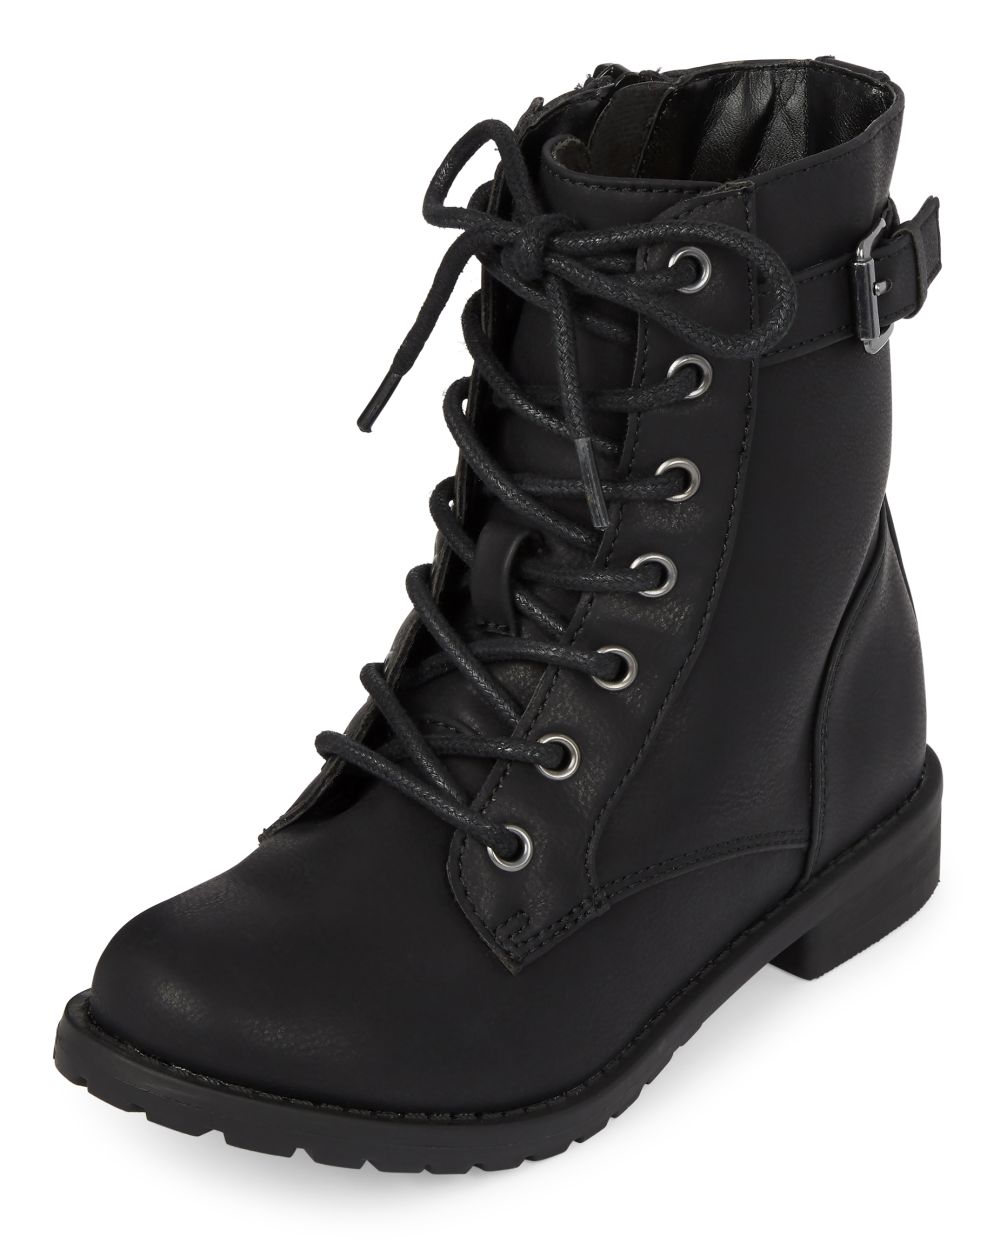 Girls Buckle Lace Up Boots